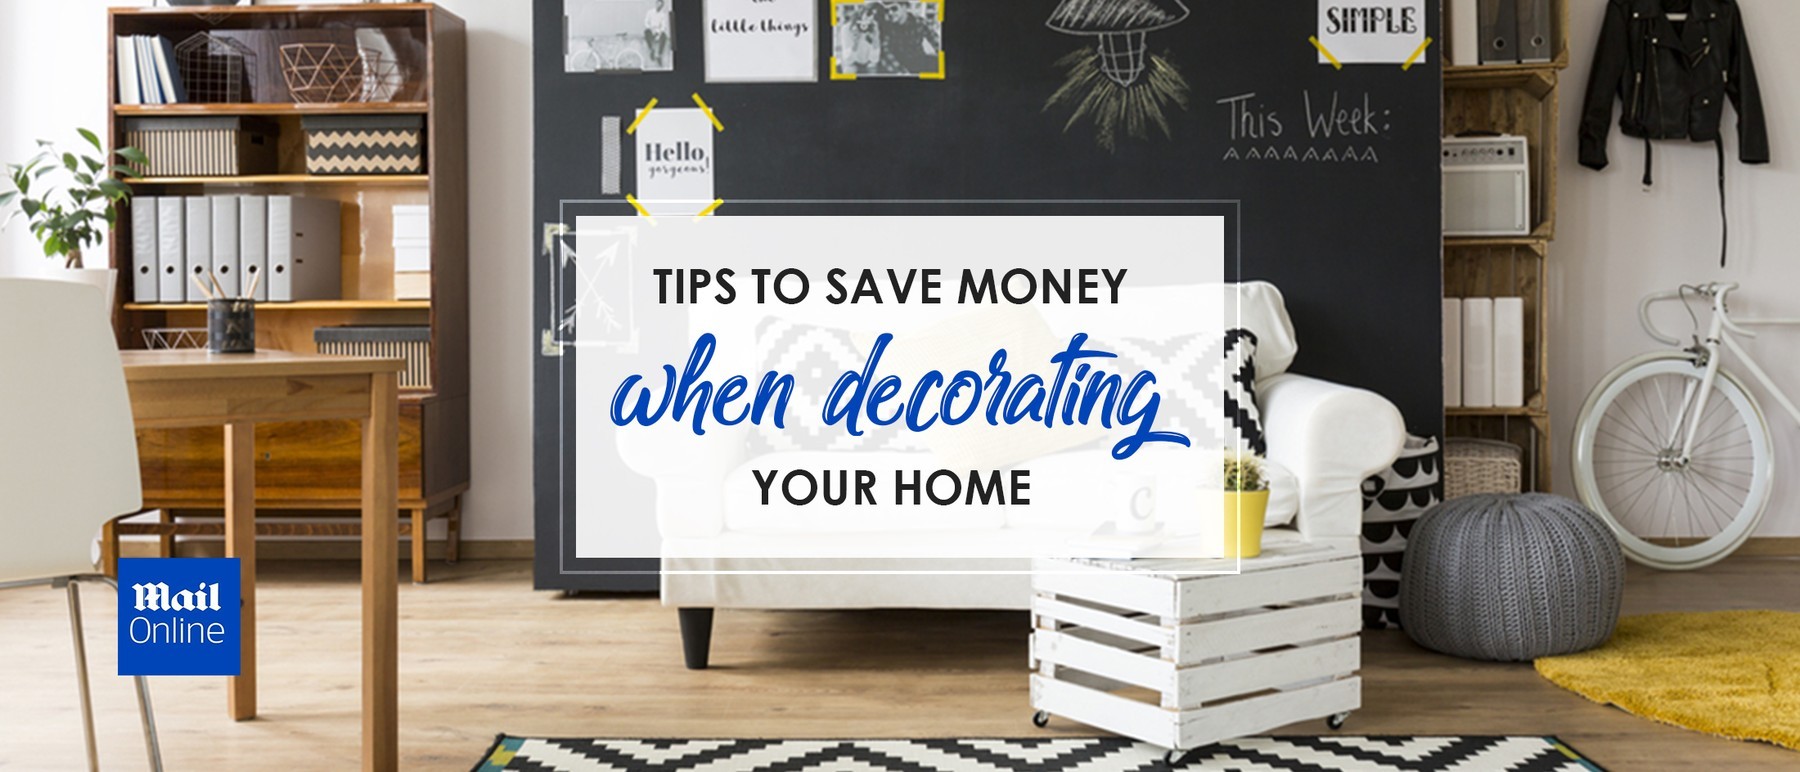 Tried and tested tips to save when decorating your home